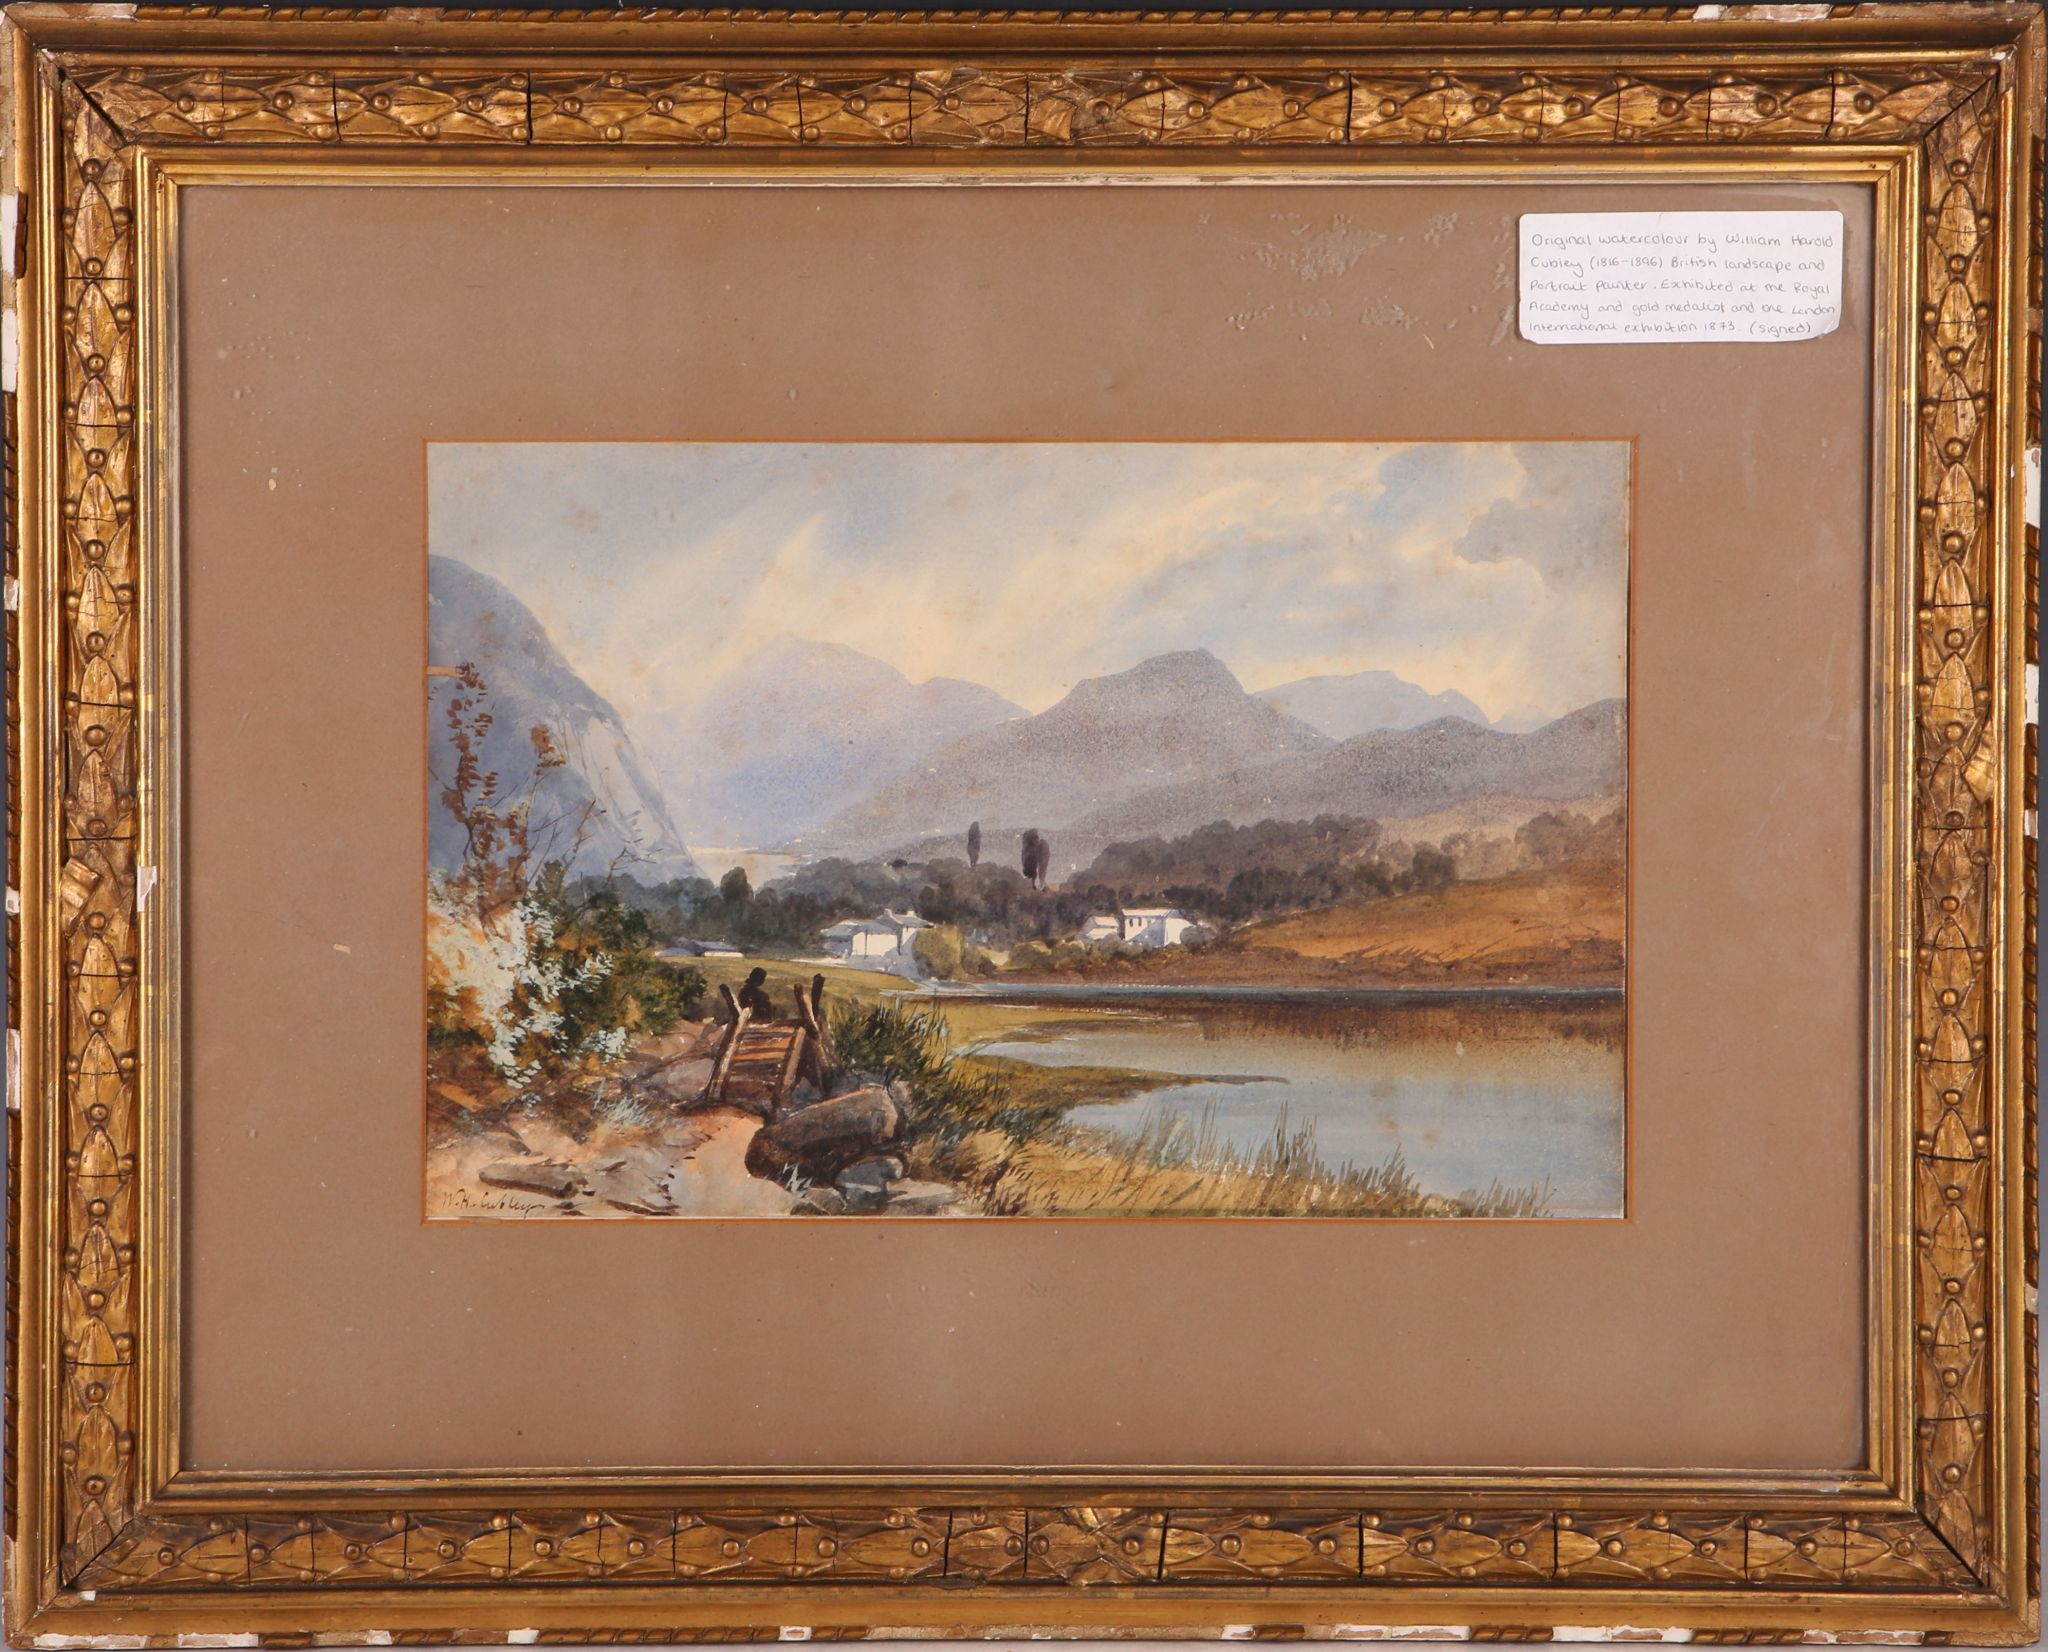 William Harold Cubley (1816-1896), landscape with distant mountains and lake, watercolour, signed